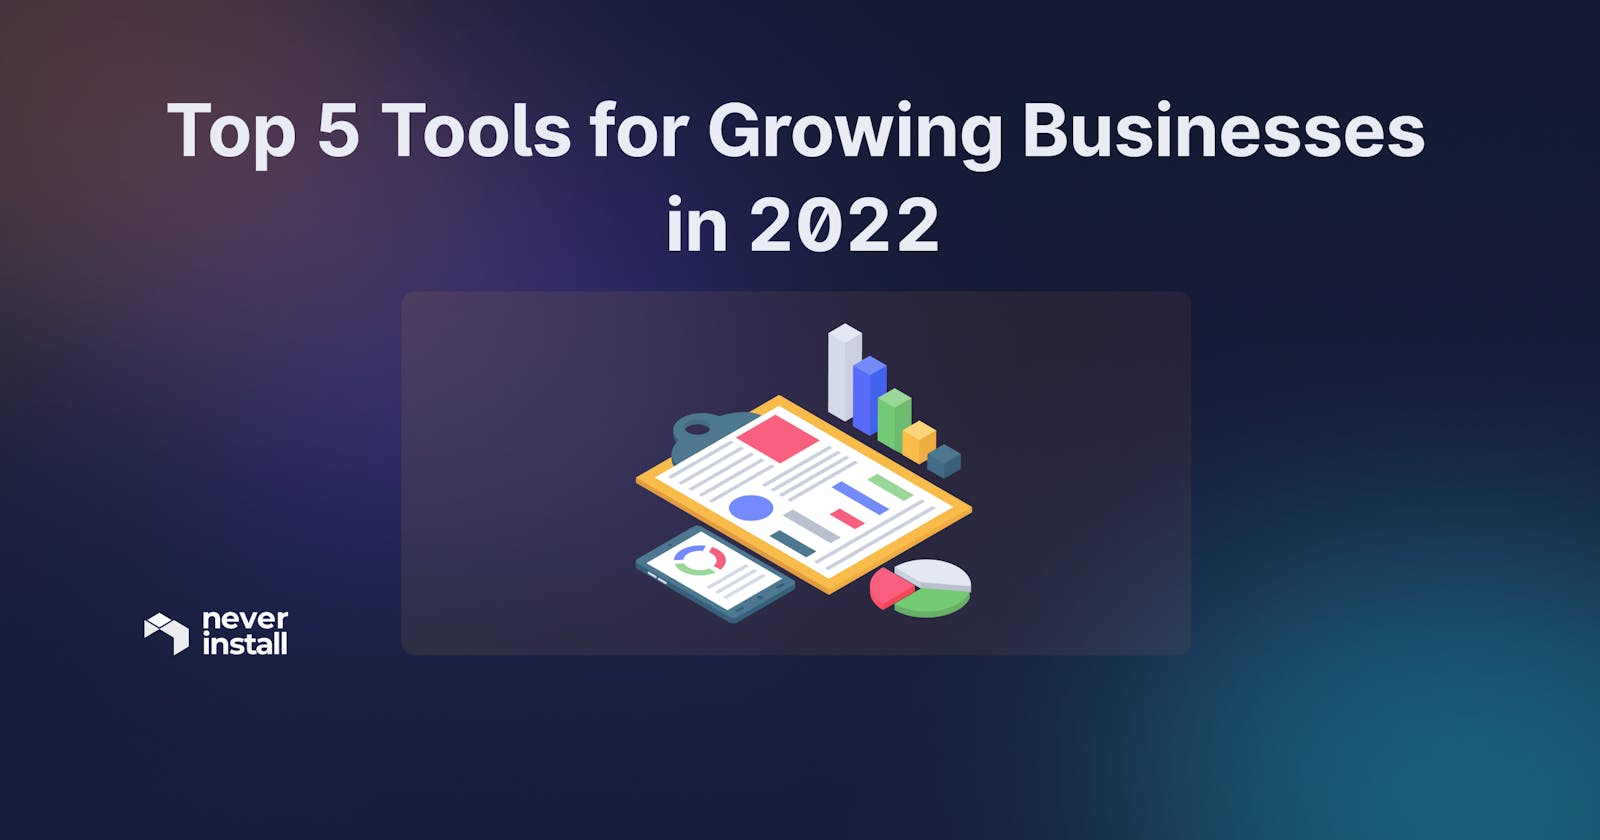 Top 5 Tools for Growing Businesses in 2022